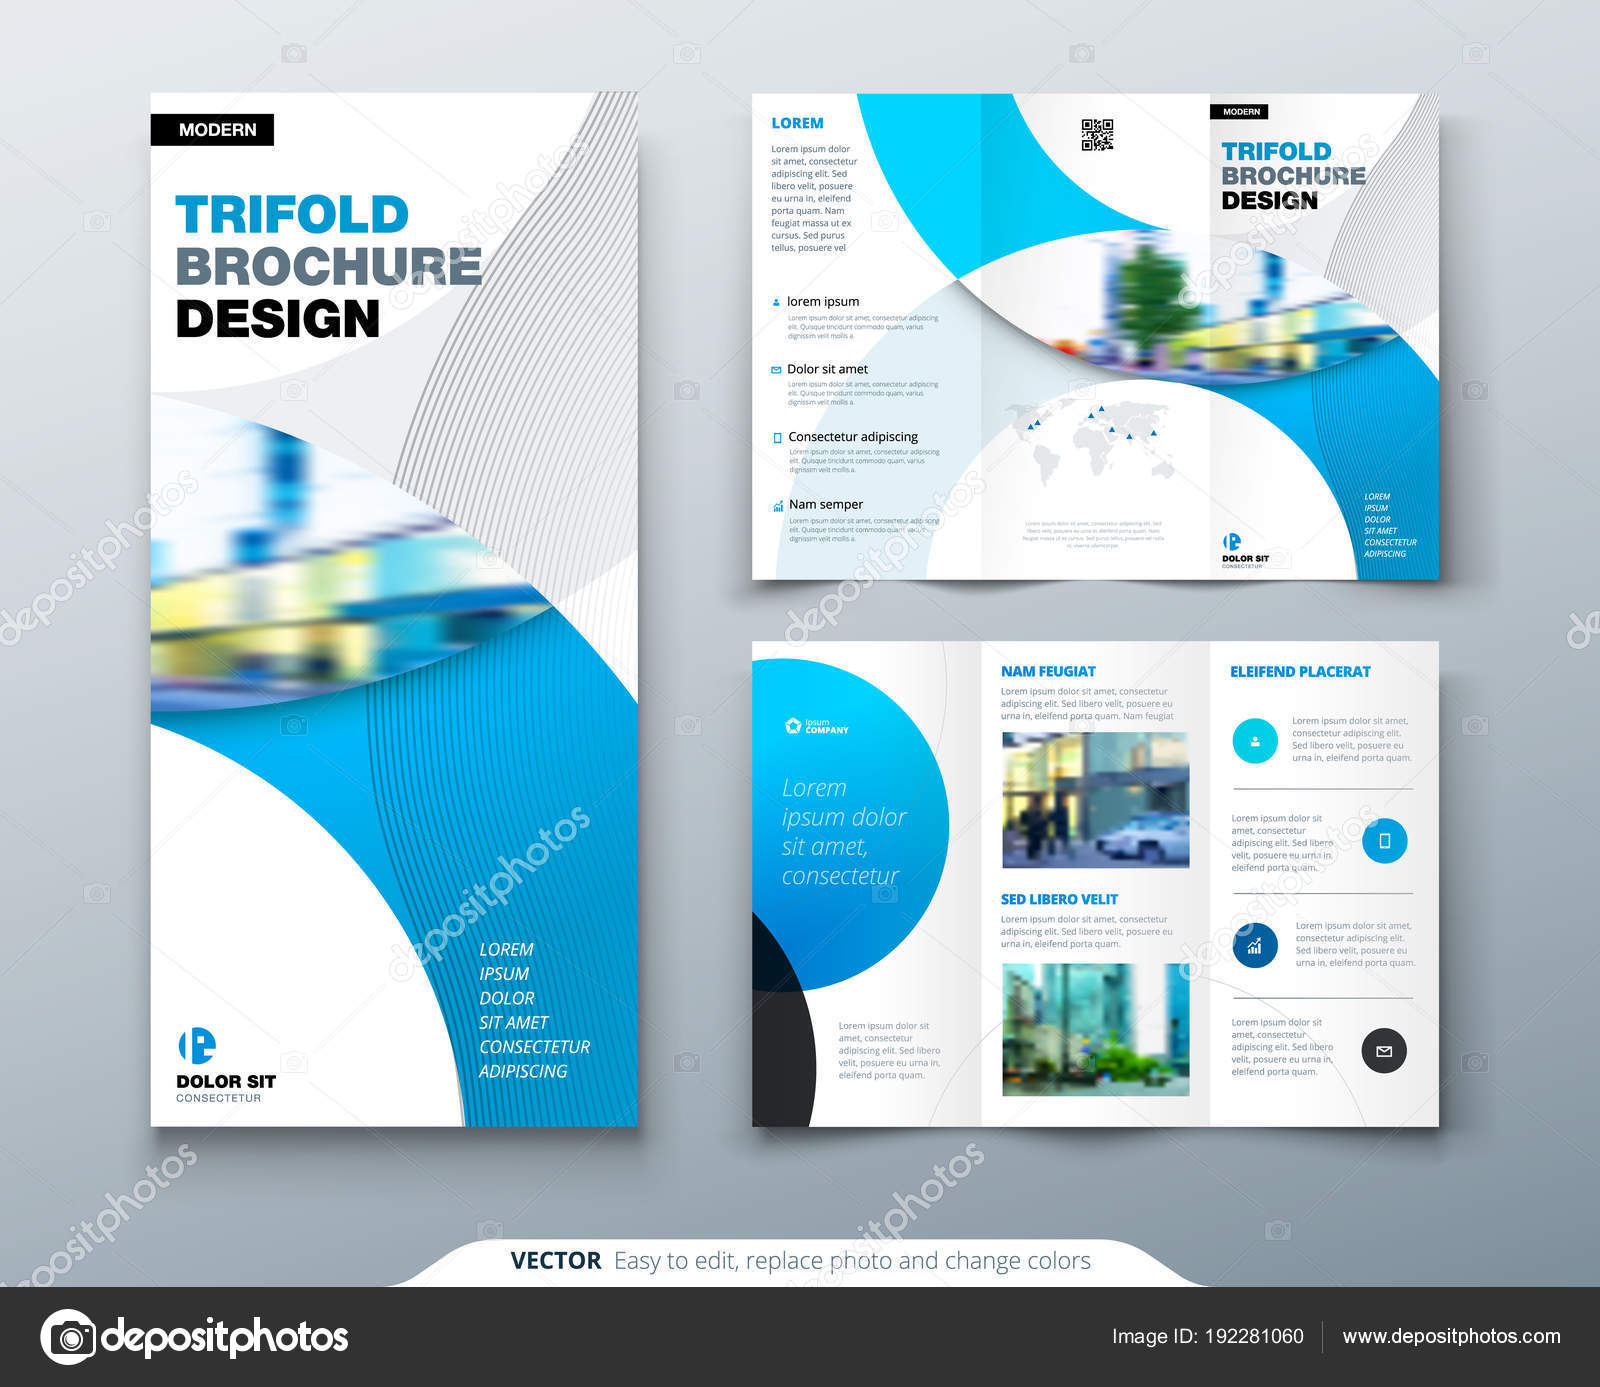 Tri Fold Brochure Design With Circle Corporate Business Template For Tri Fold Flyer Layout With Modern Photo And Abstract Circle Background Creative Concept Folded Flyer Or Brochure Stock Vector C Greatbergens